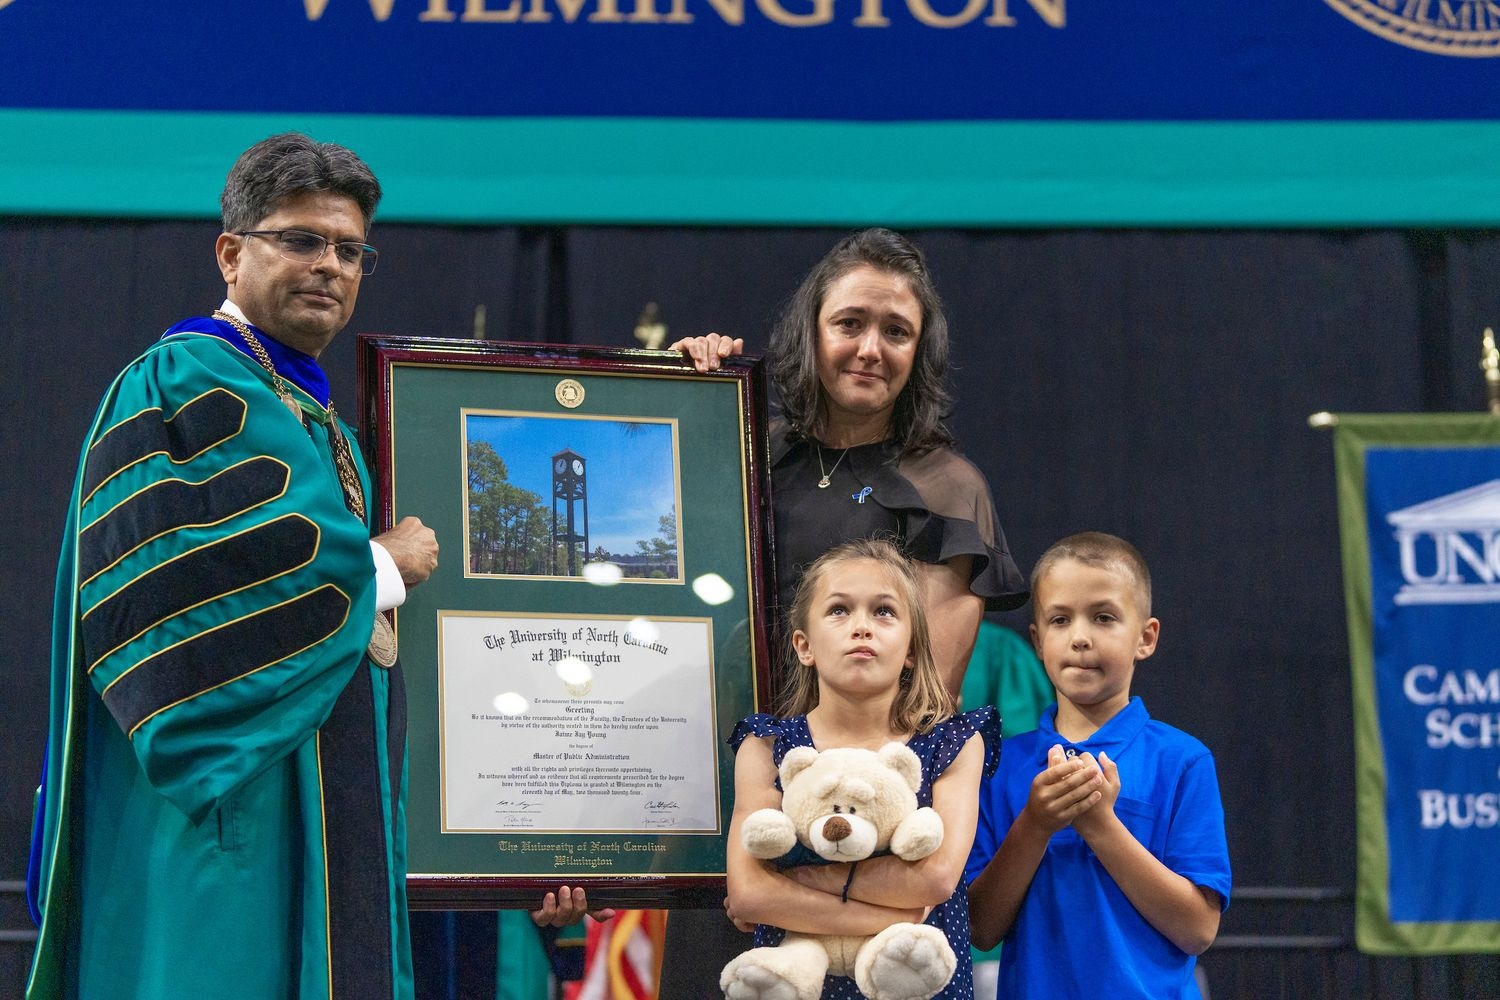 wife, Amy, and two children, Gracie and Maverick, were present to accept Jaime Jay “JJ” Young's posthumous degree.